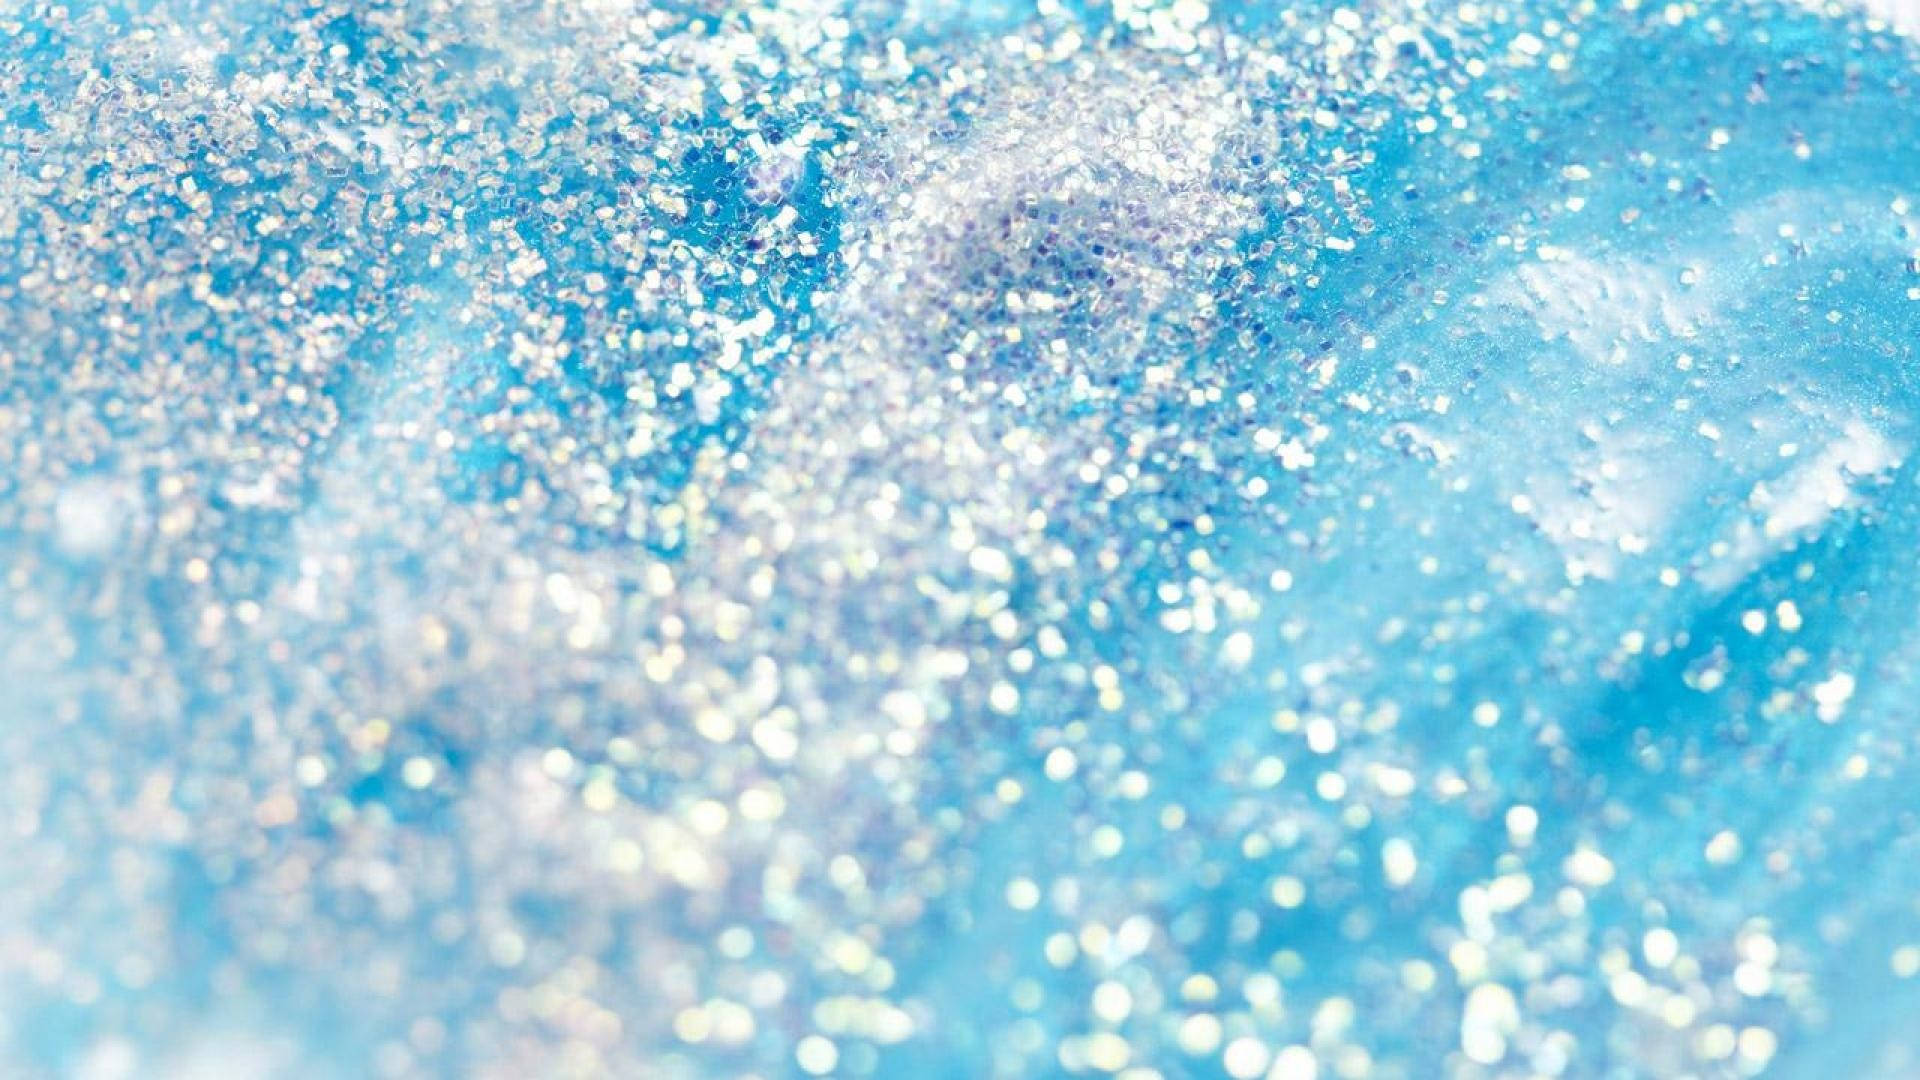 Abstract White And Blue Glitter Background